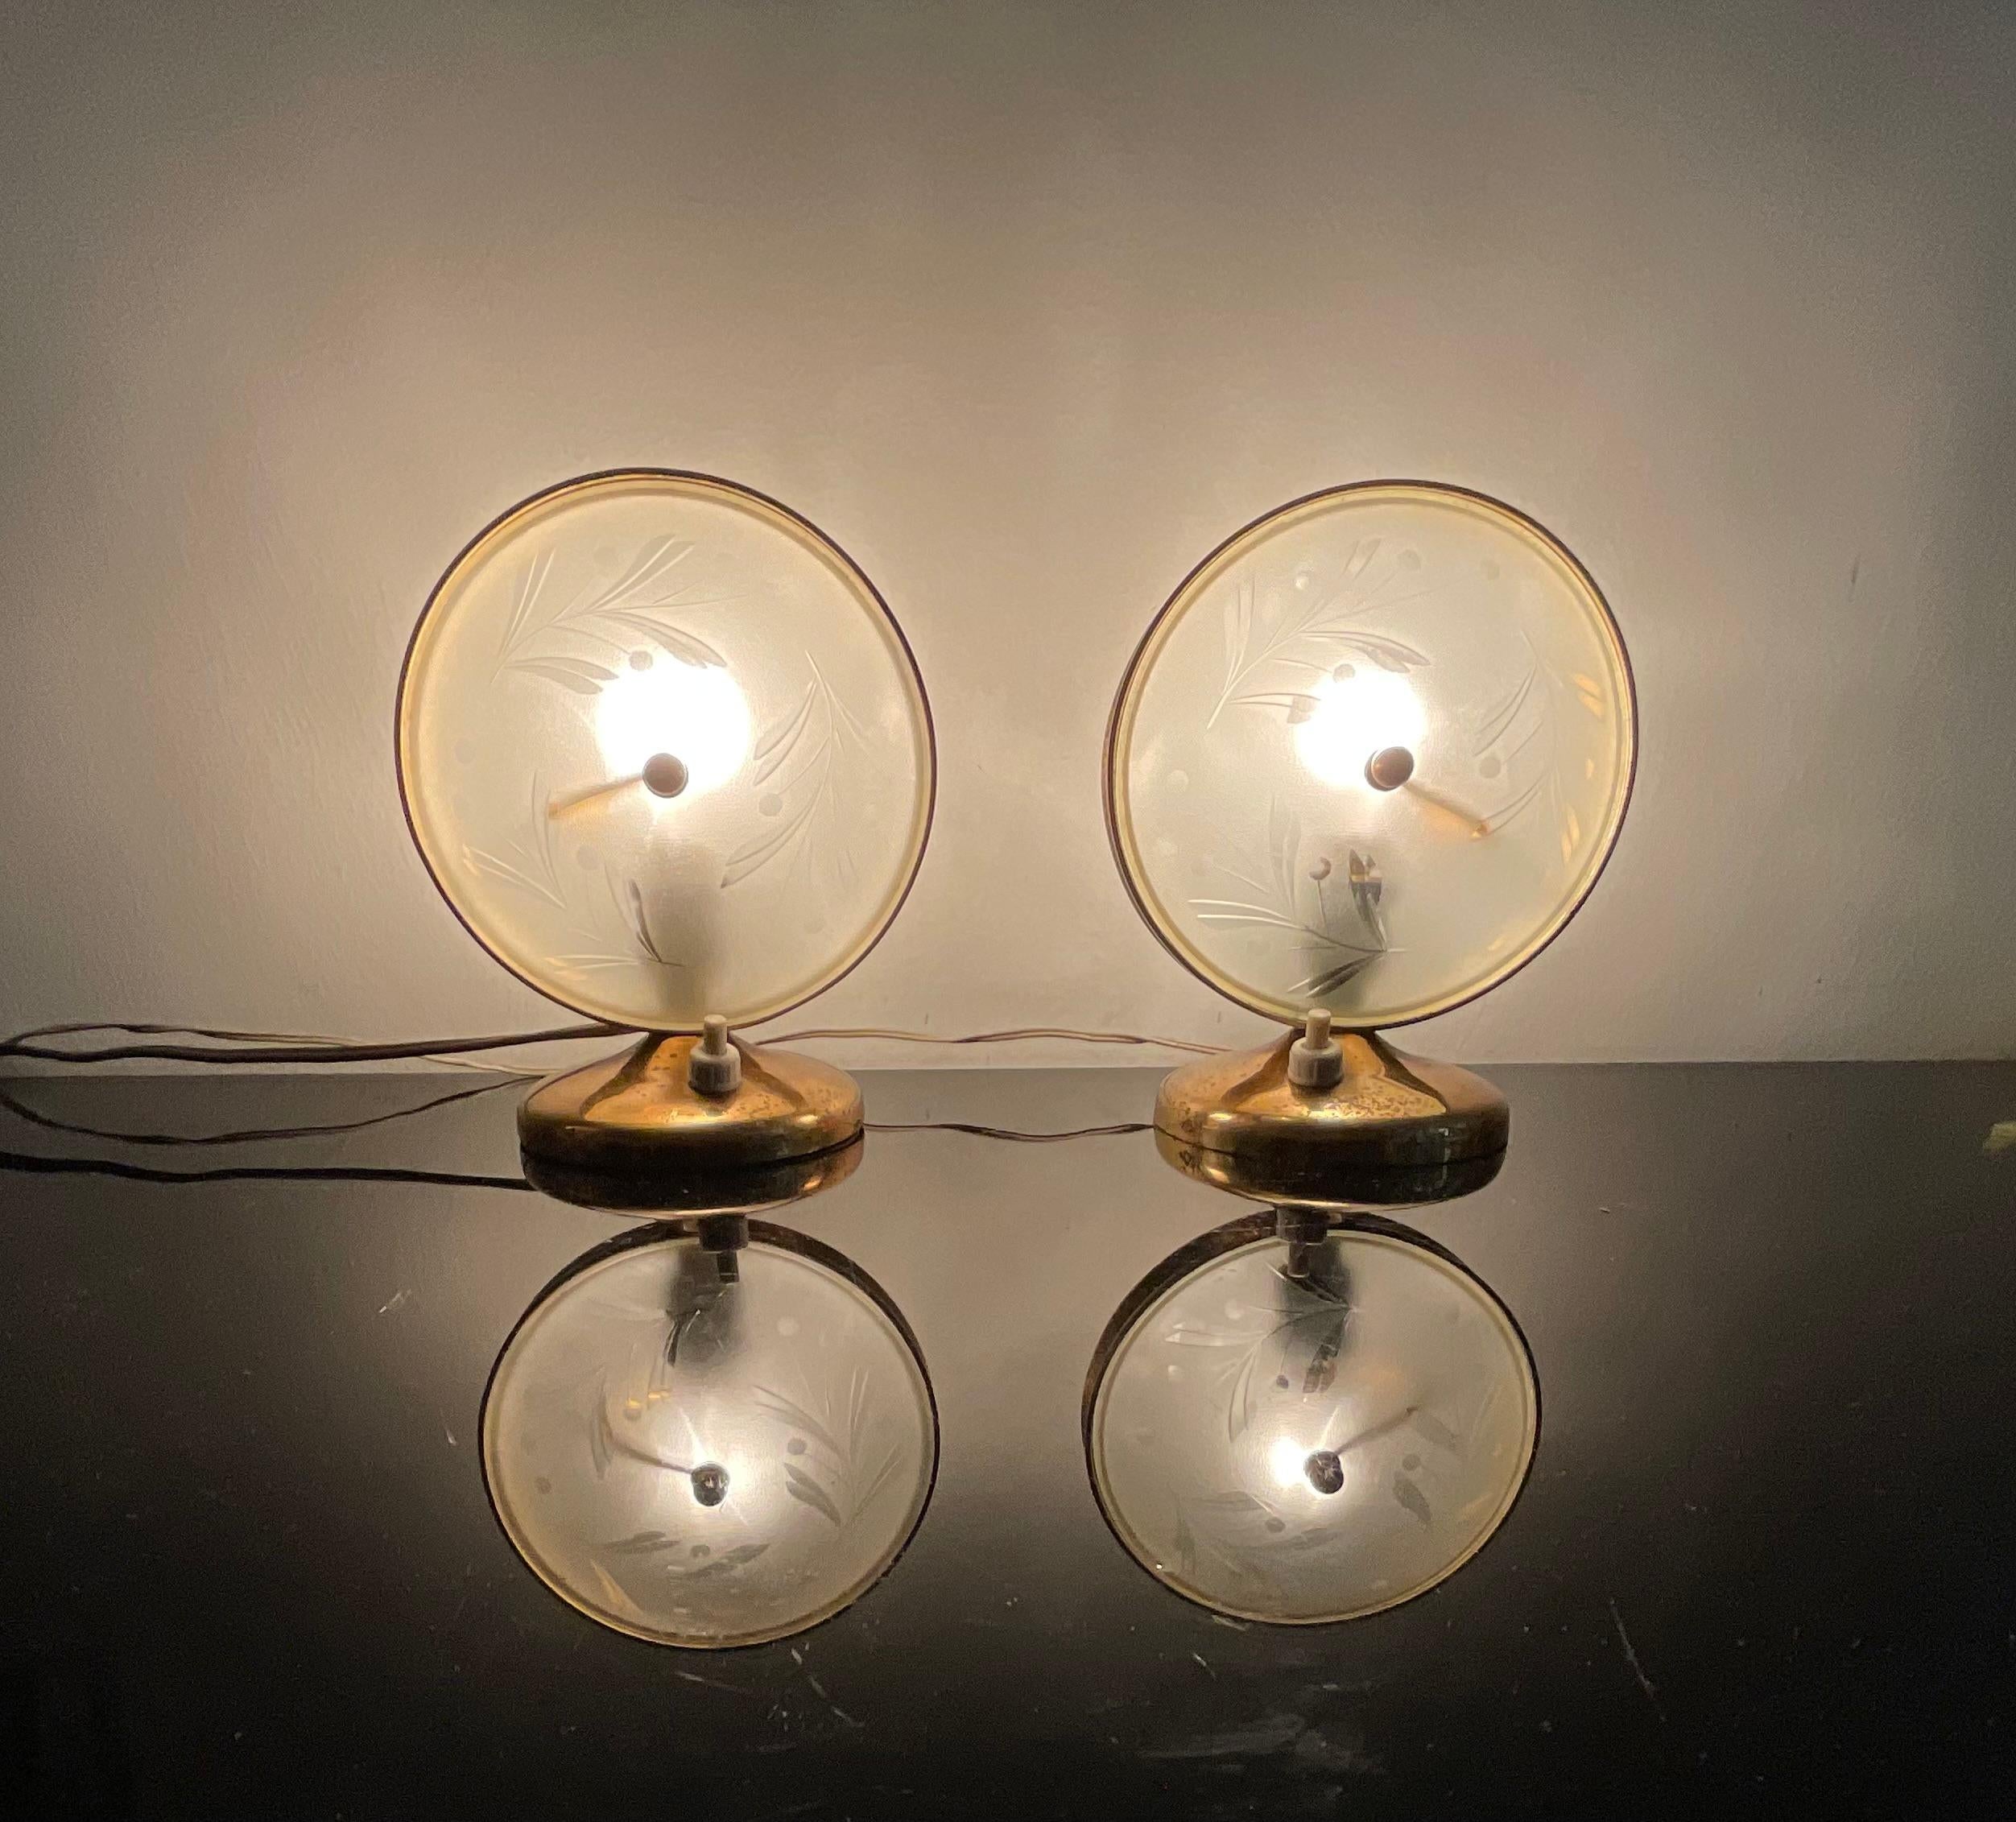 Beautiful pair of table or bedside lamps, made of brass with hand-carved glass diffusers with stylized floral motifs.
Perfect condition.
Measures .
Height. 16.5 cm
Diameter 13 cm
Depth. 9 cm